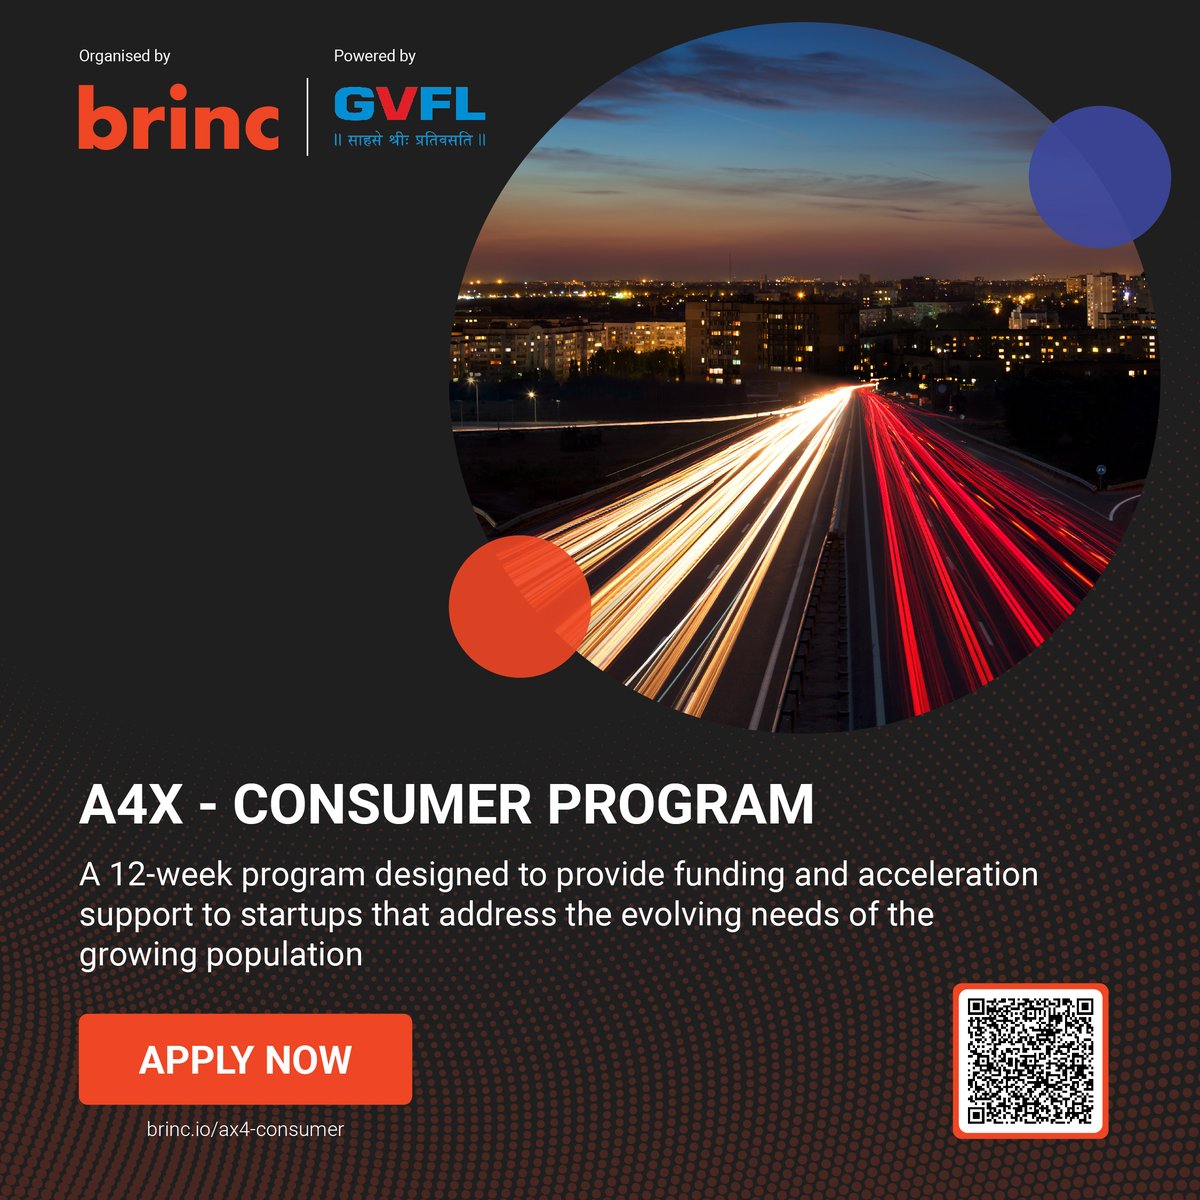 Applications for the Brinc x GVFL A4X Accelerator program are open! GVFL is to invest between INR 1.5 crore to 2 crore in each startup. Microsoft for Startups, our technology program partner, will provide credits and services valued at up to US$350,000.